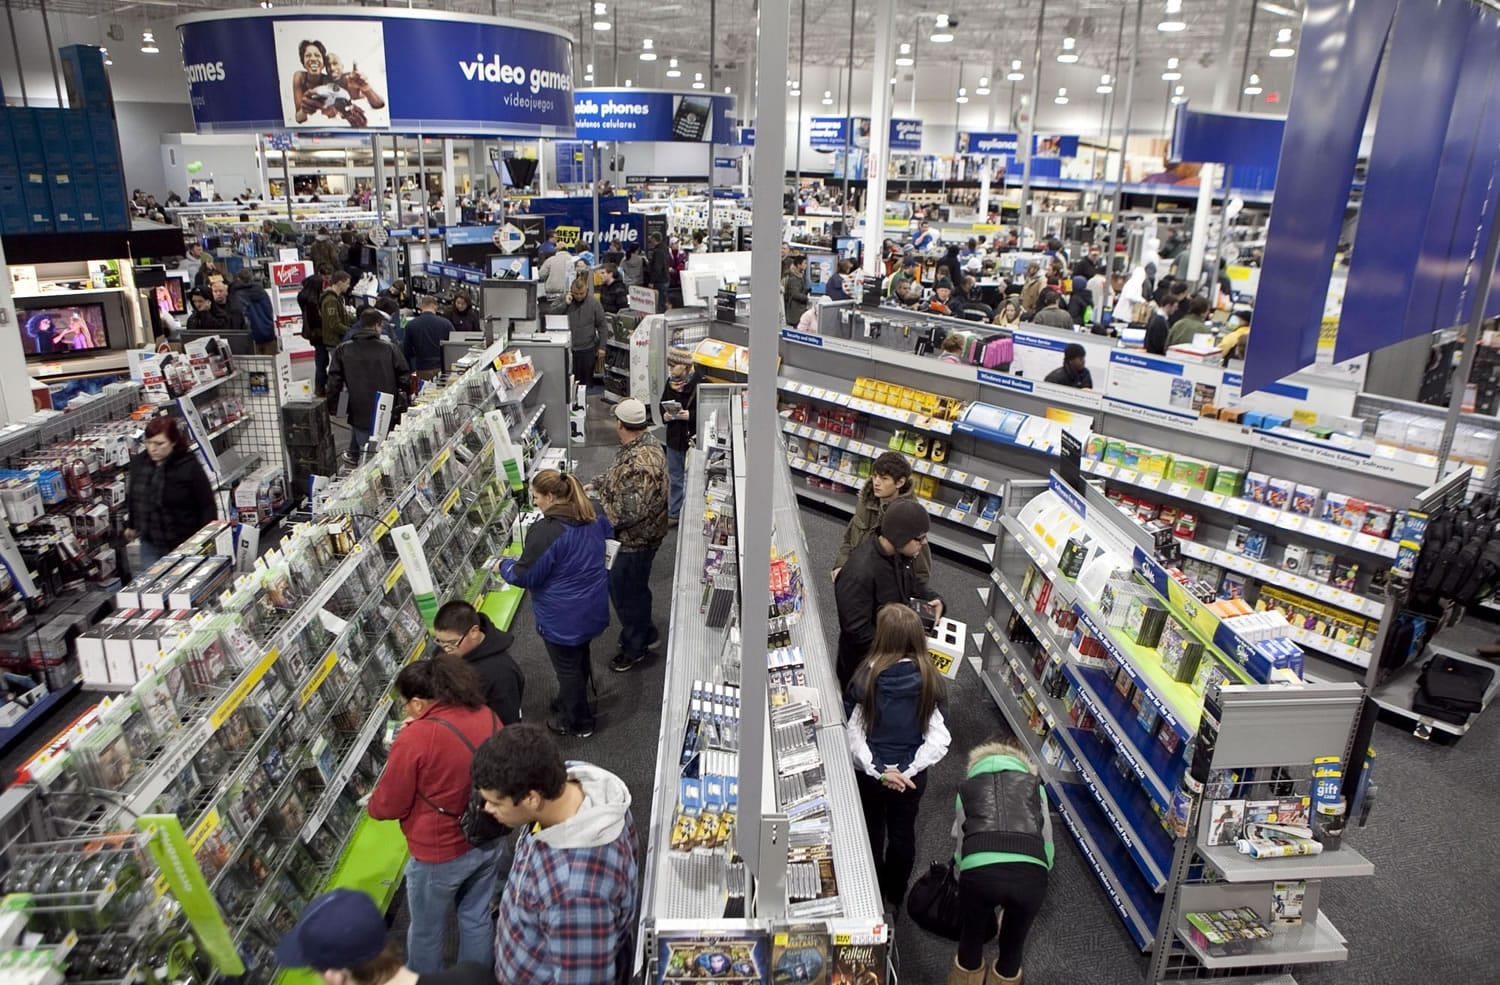 Crowds bustled through Best Buy's store in Vancouver in 2010.